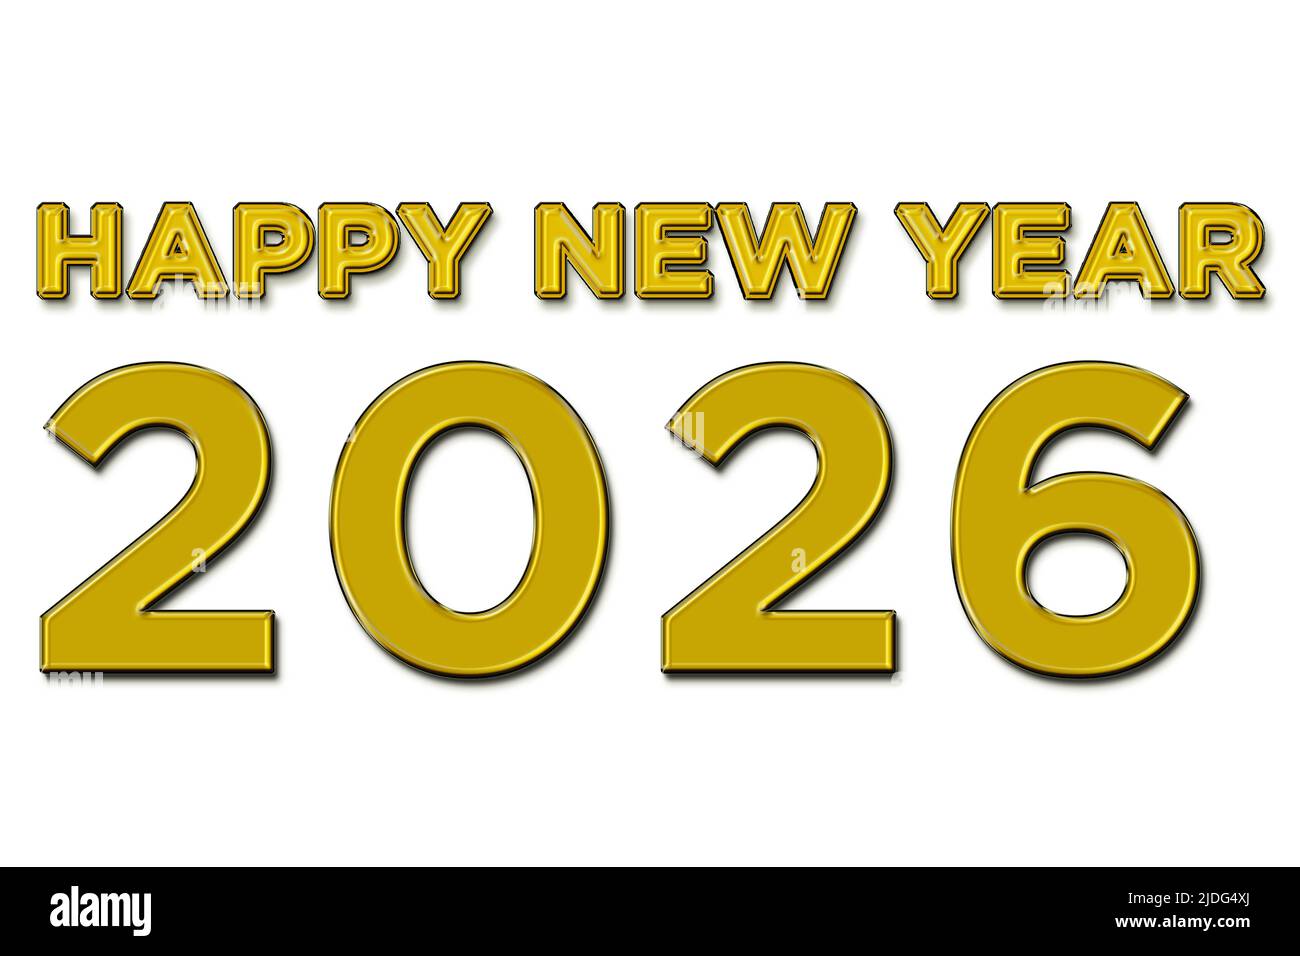 https://c8.alamy.com/comp/2JDG4XJ/happy-new-year-2026-illustration-in-yellow-color-text-on-white-background-2JDG4XJ.jpg